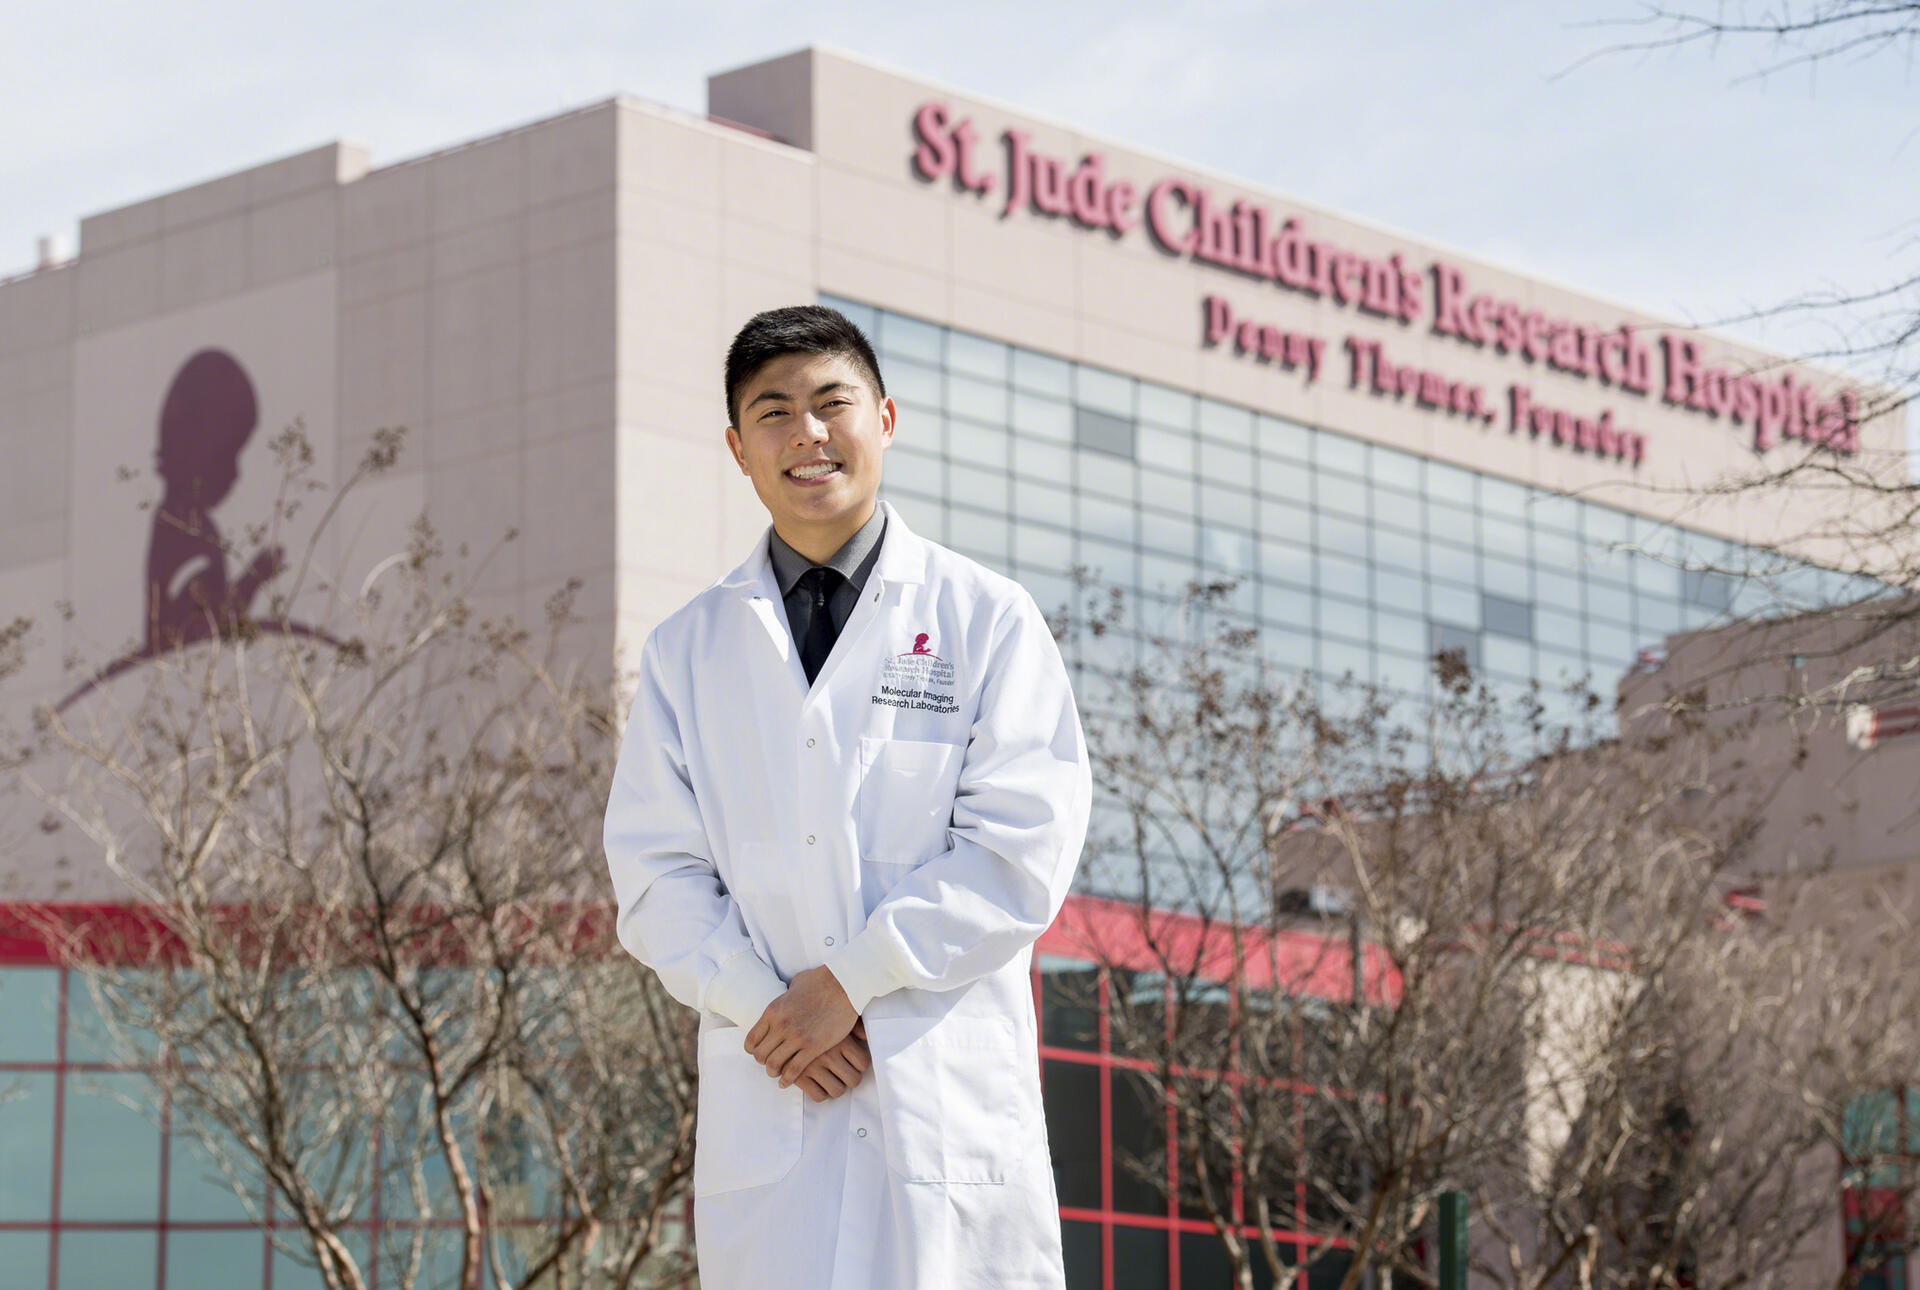 A young man in a white coat stands outside St. Jude Children's Research Hospital.